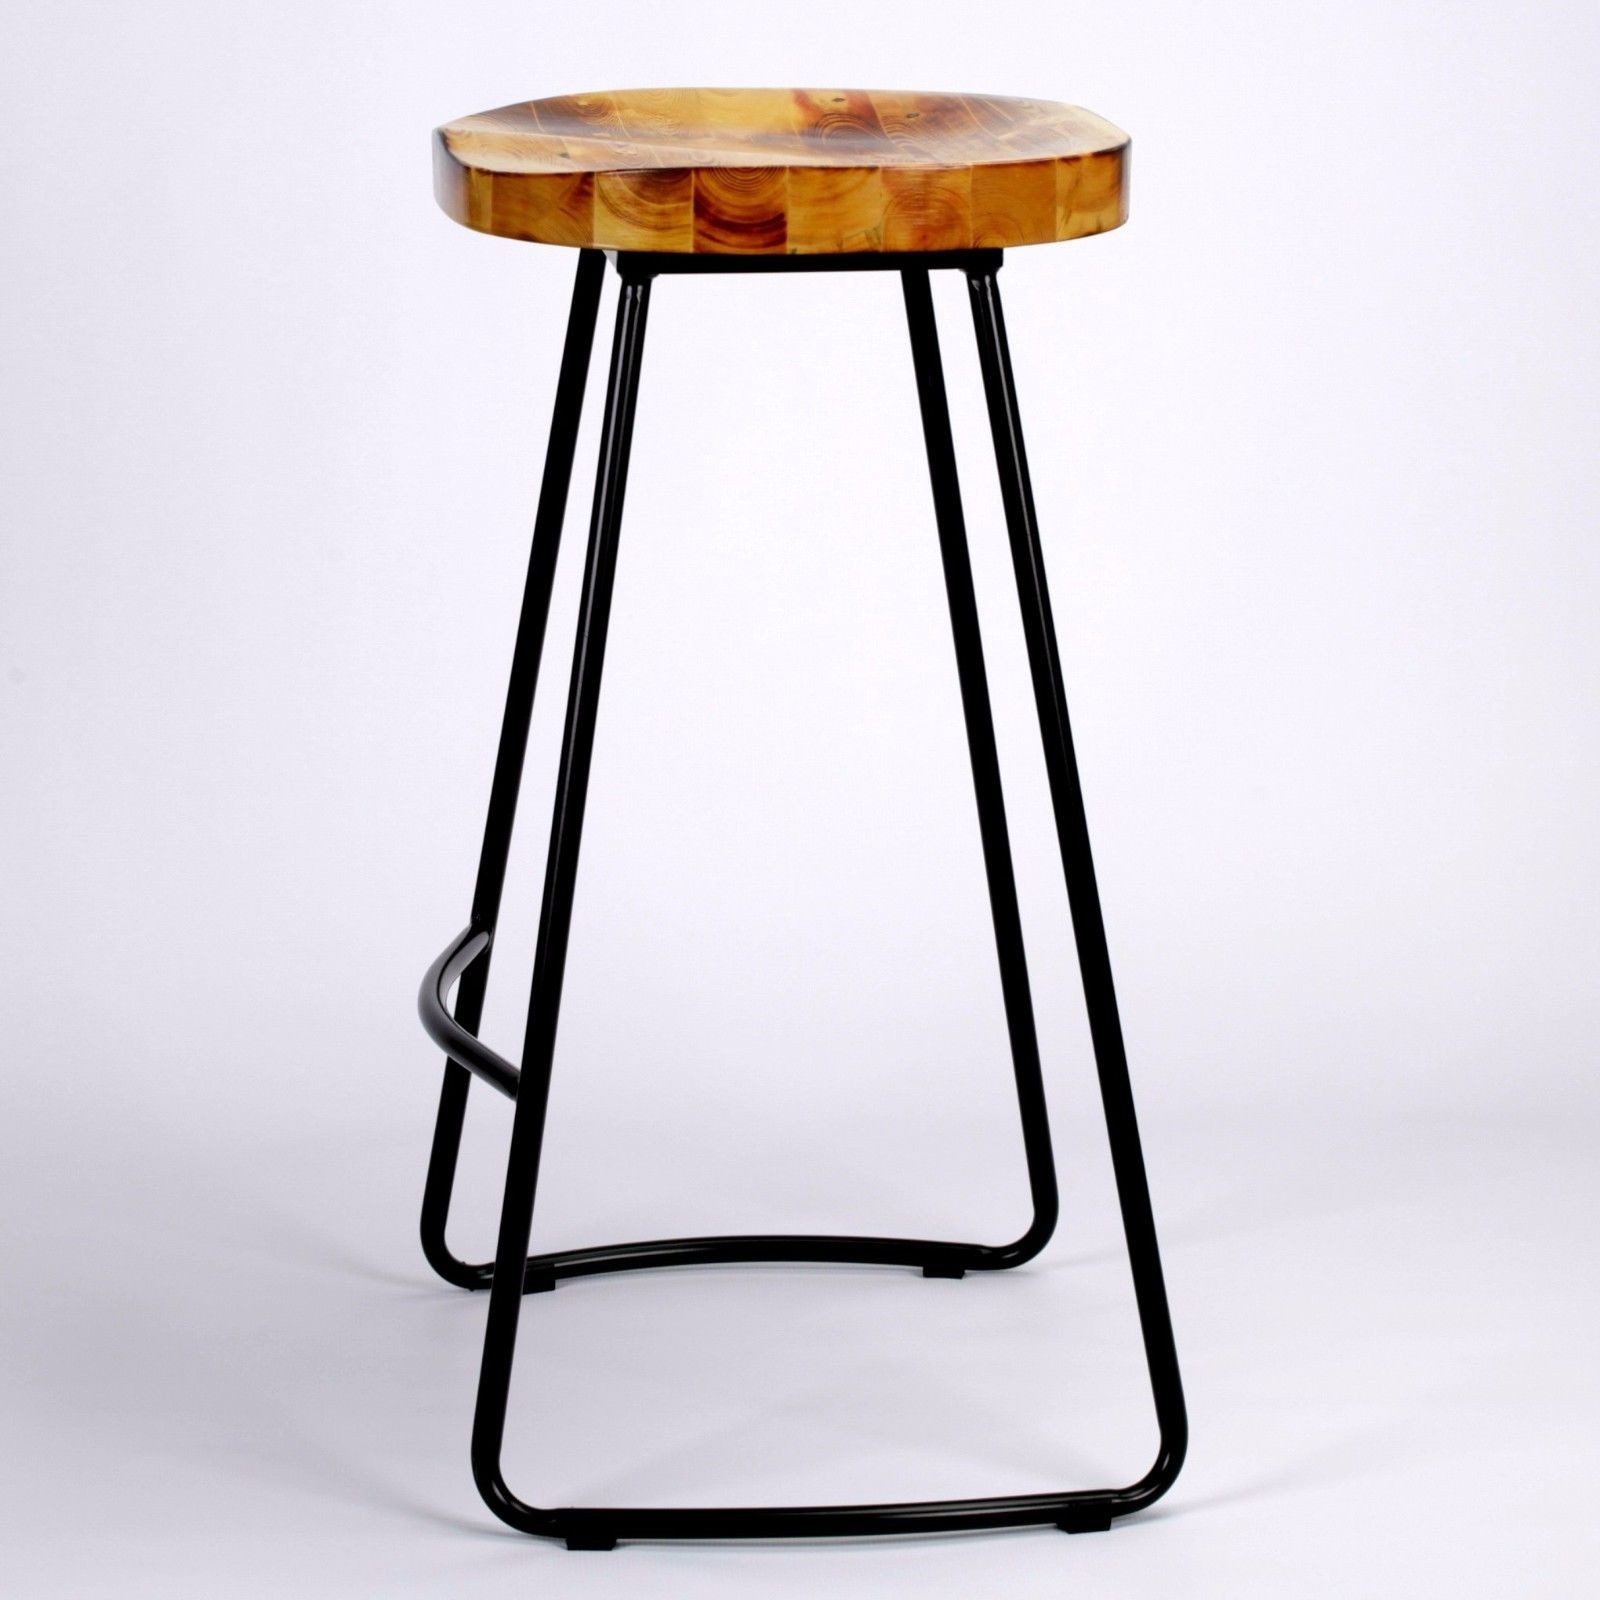 Industrial Tractor Style Wooden Seat Metal Bar Stool Furniture - La